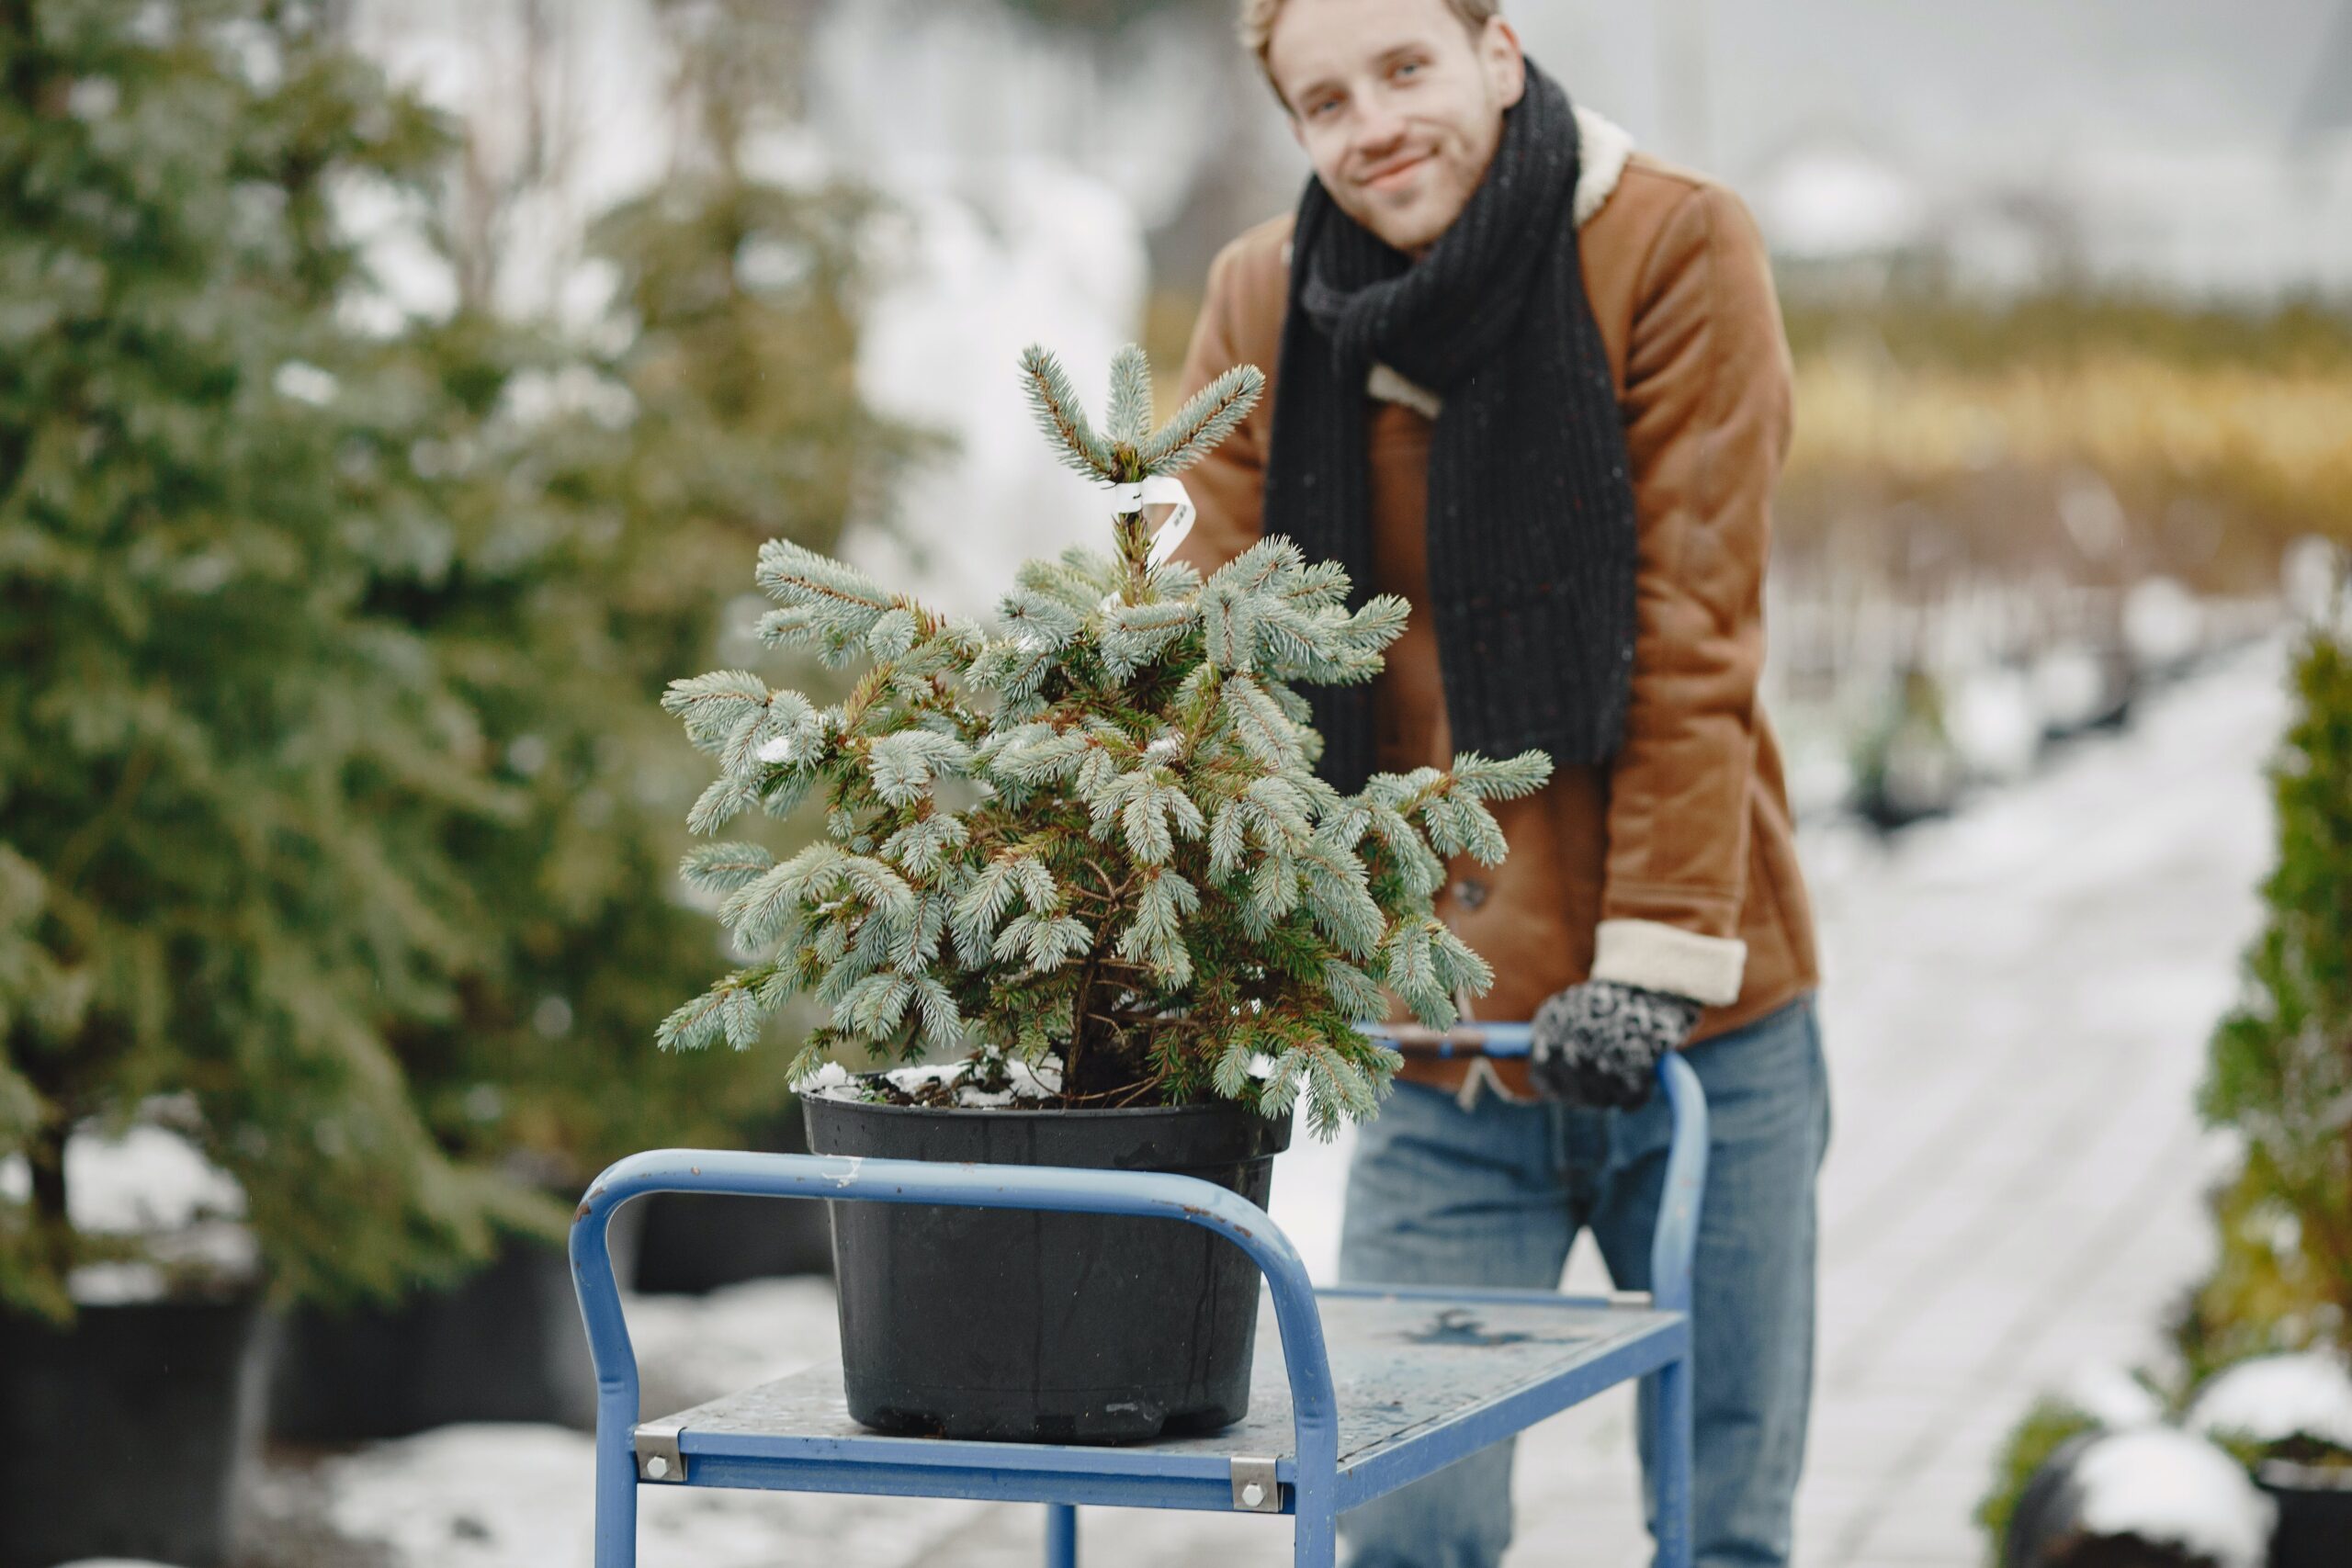 Potted Christmas trees come in all shapes in sizes. They are a lot heavier than cut trees, so buying one under 5ft is recommended for ease of movement.